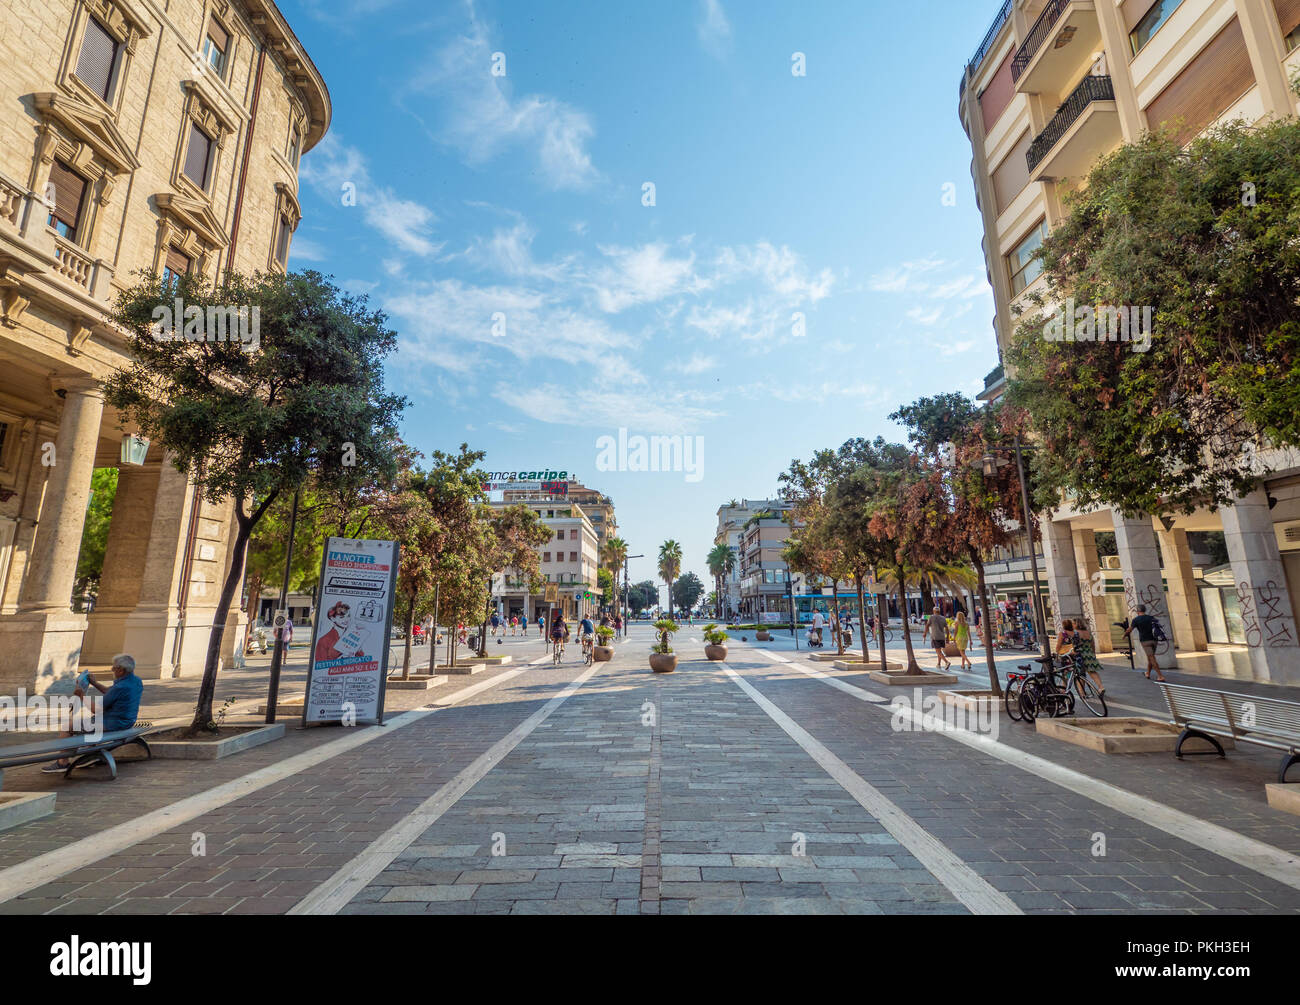 Pescara Italy The Modern Historic Center Of The Sea City In Abruzzo Region During A Summer Sunday Morning Stock Photo Alamy